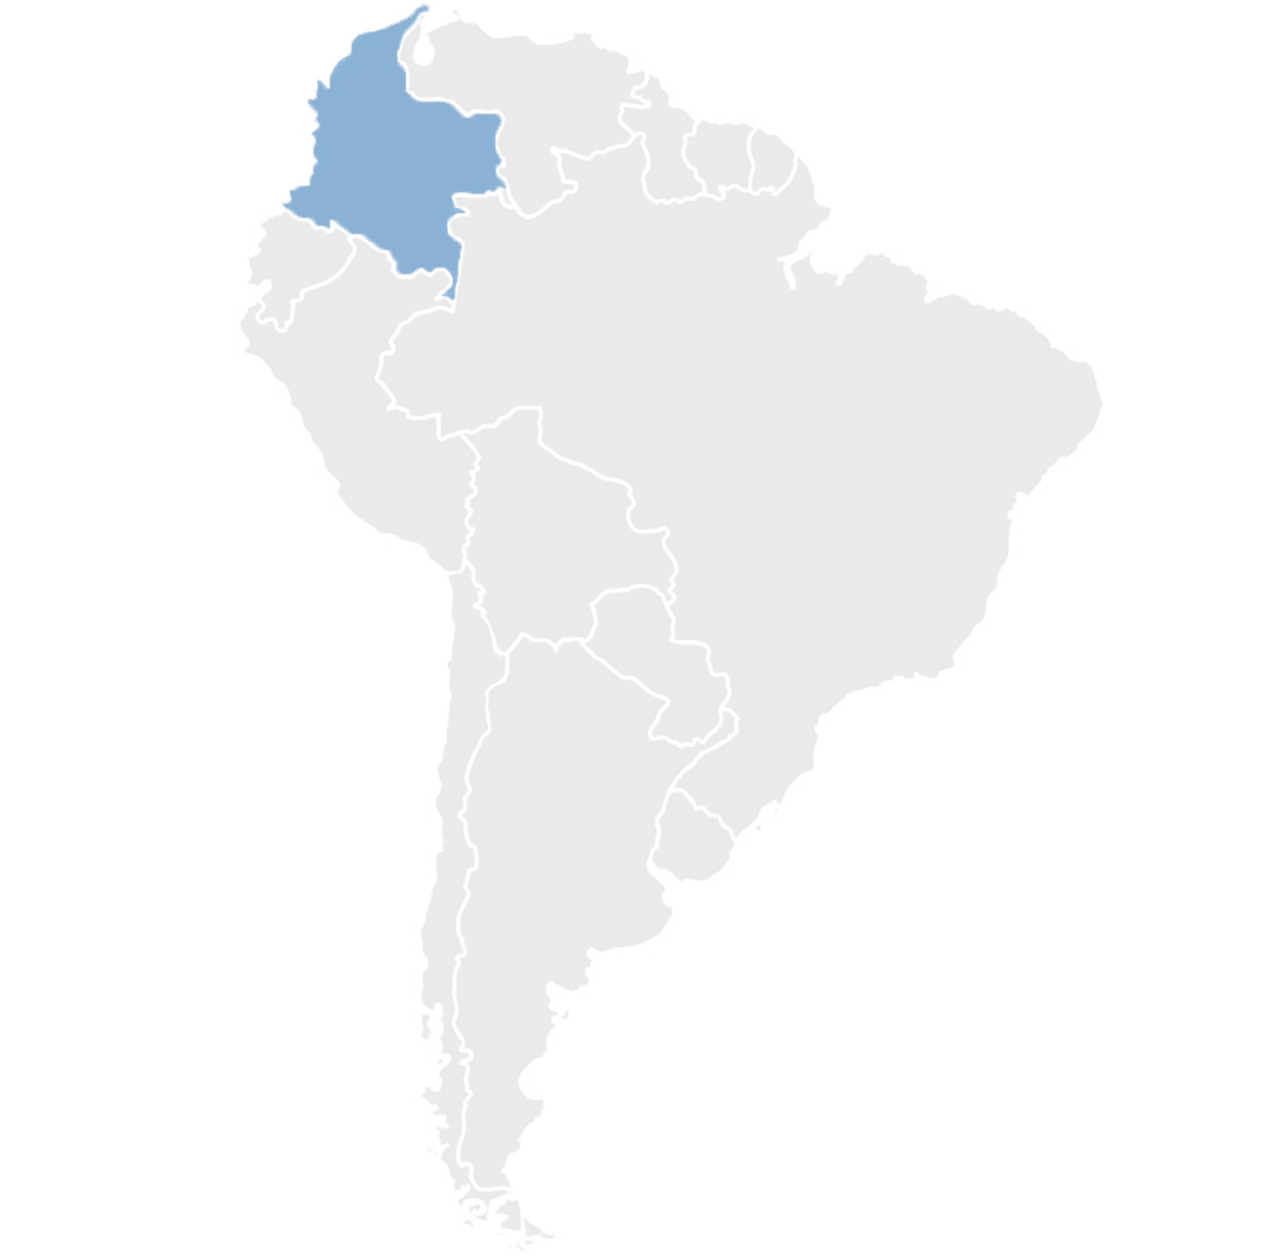 Gray map of South America with Colombia in blue